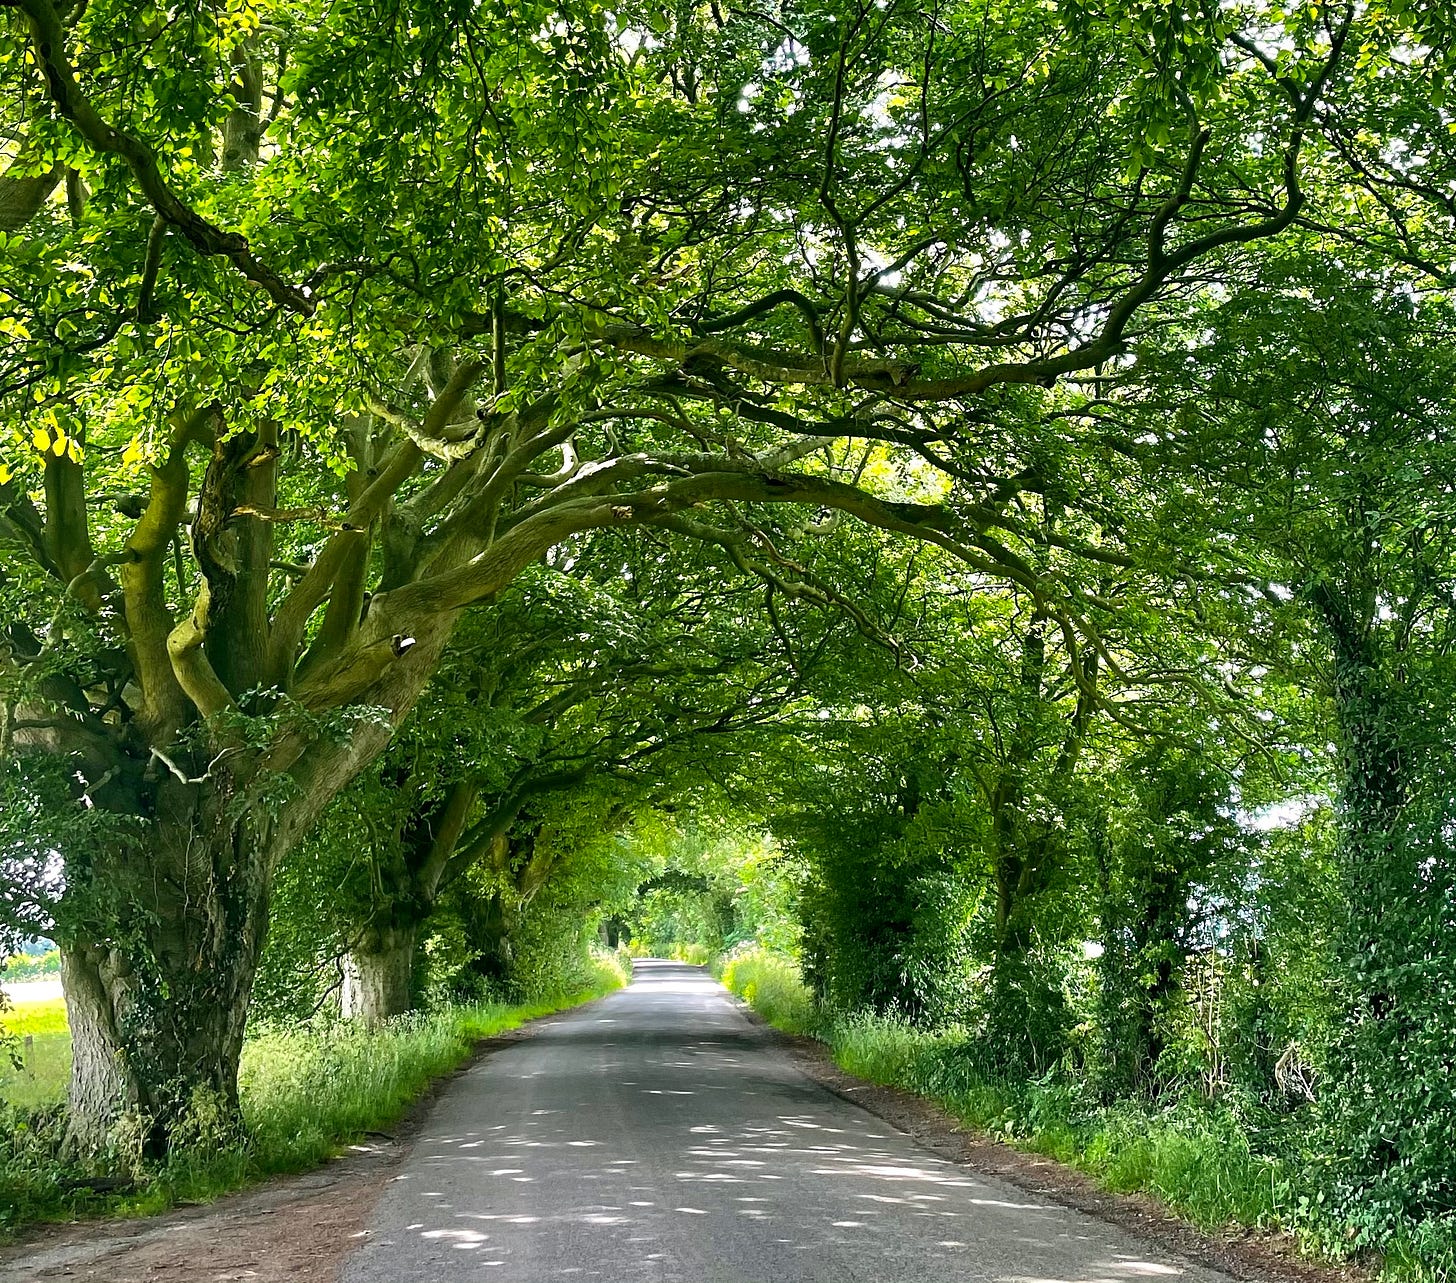 Tree branches curving over a country road, forming a tunnel of bright green leaves